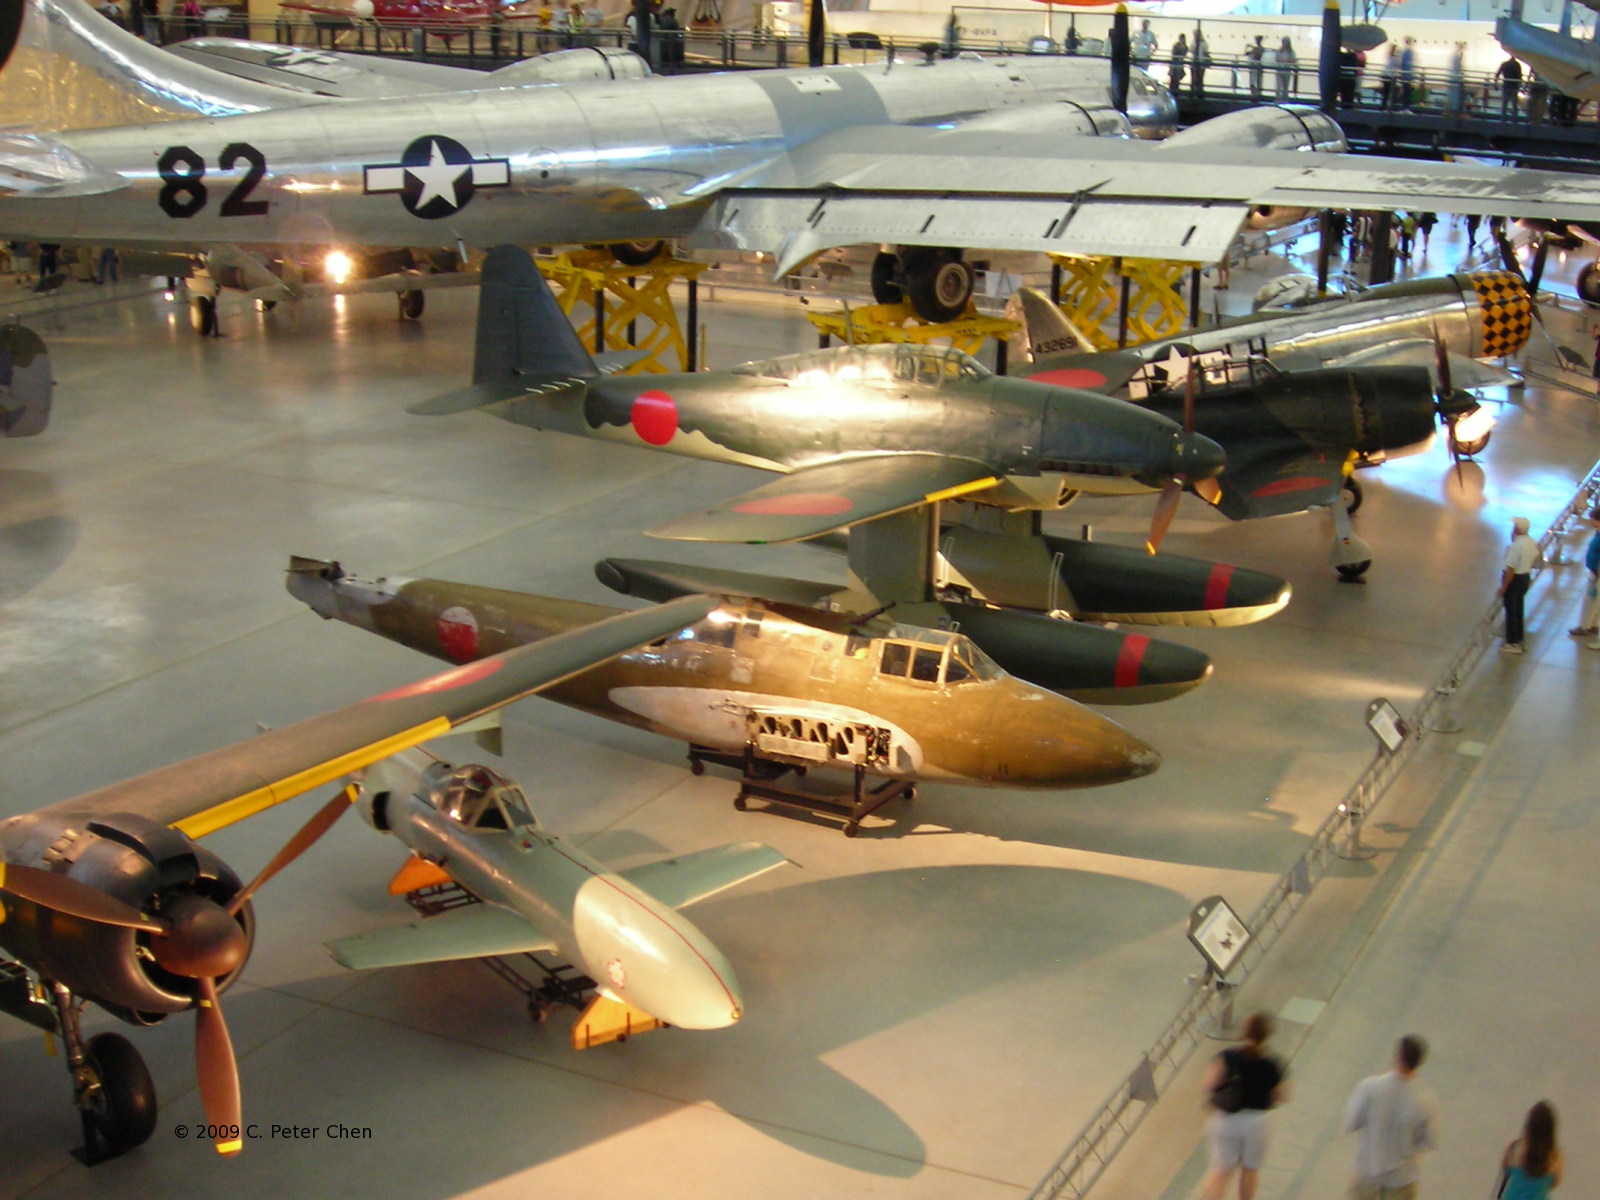 Ohka 22, Ki-45 Toryu (fuselage only), M6A1 Seiran, N1K2 Shiden, P-47D Thunderbolt on display at the Smithsonian Air and Space Museum Udvar-Hazy Center, Chantilly, Virginia, United States, 26 Apr 2009